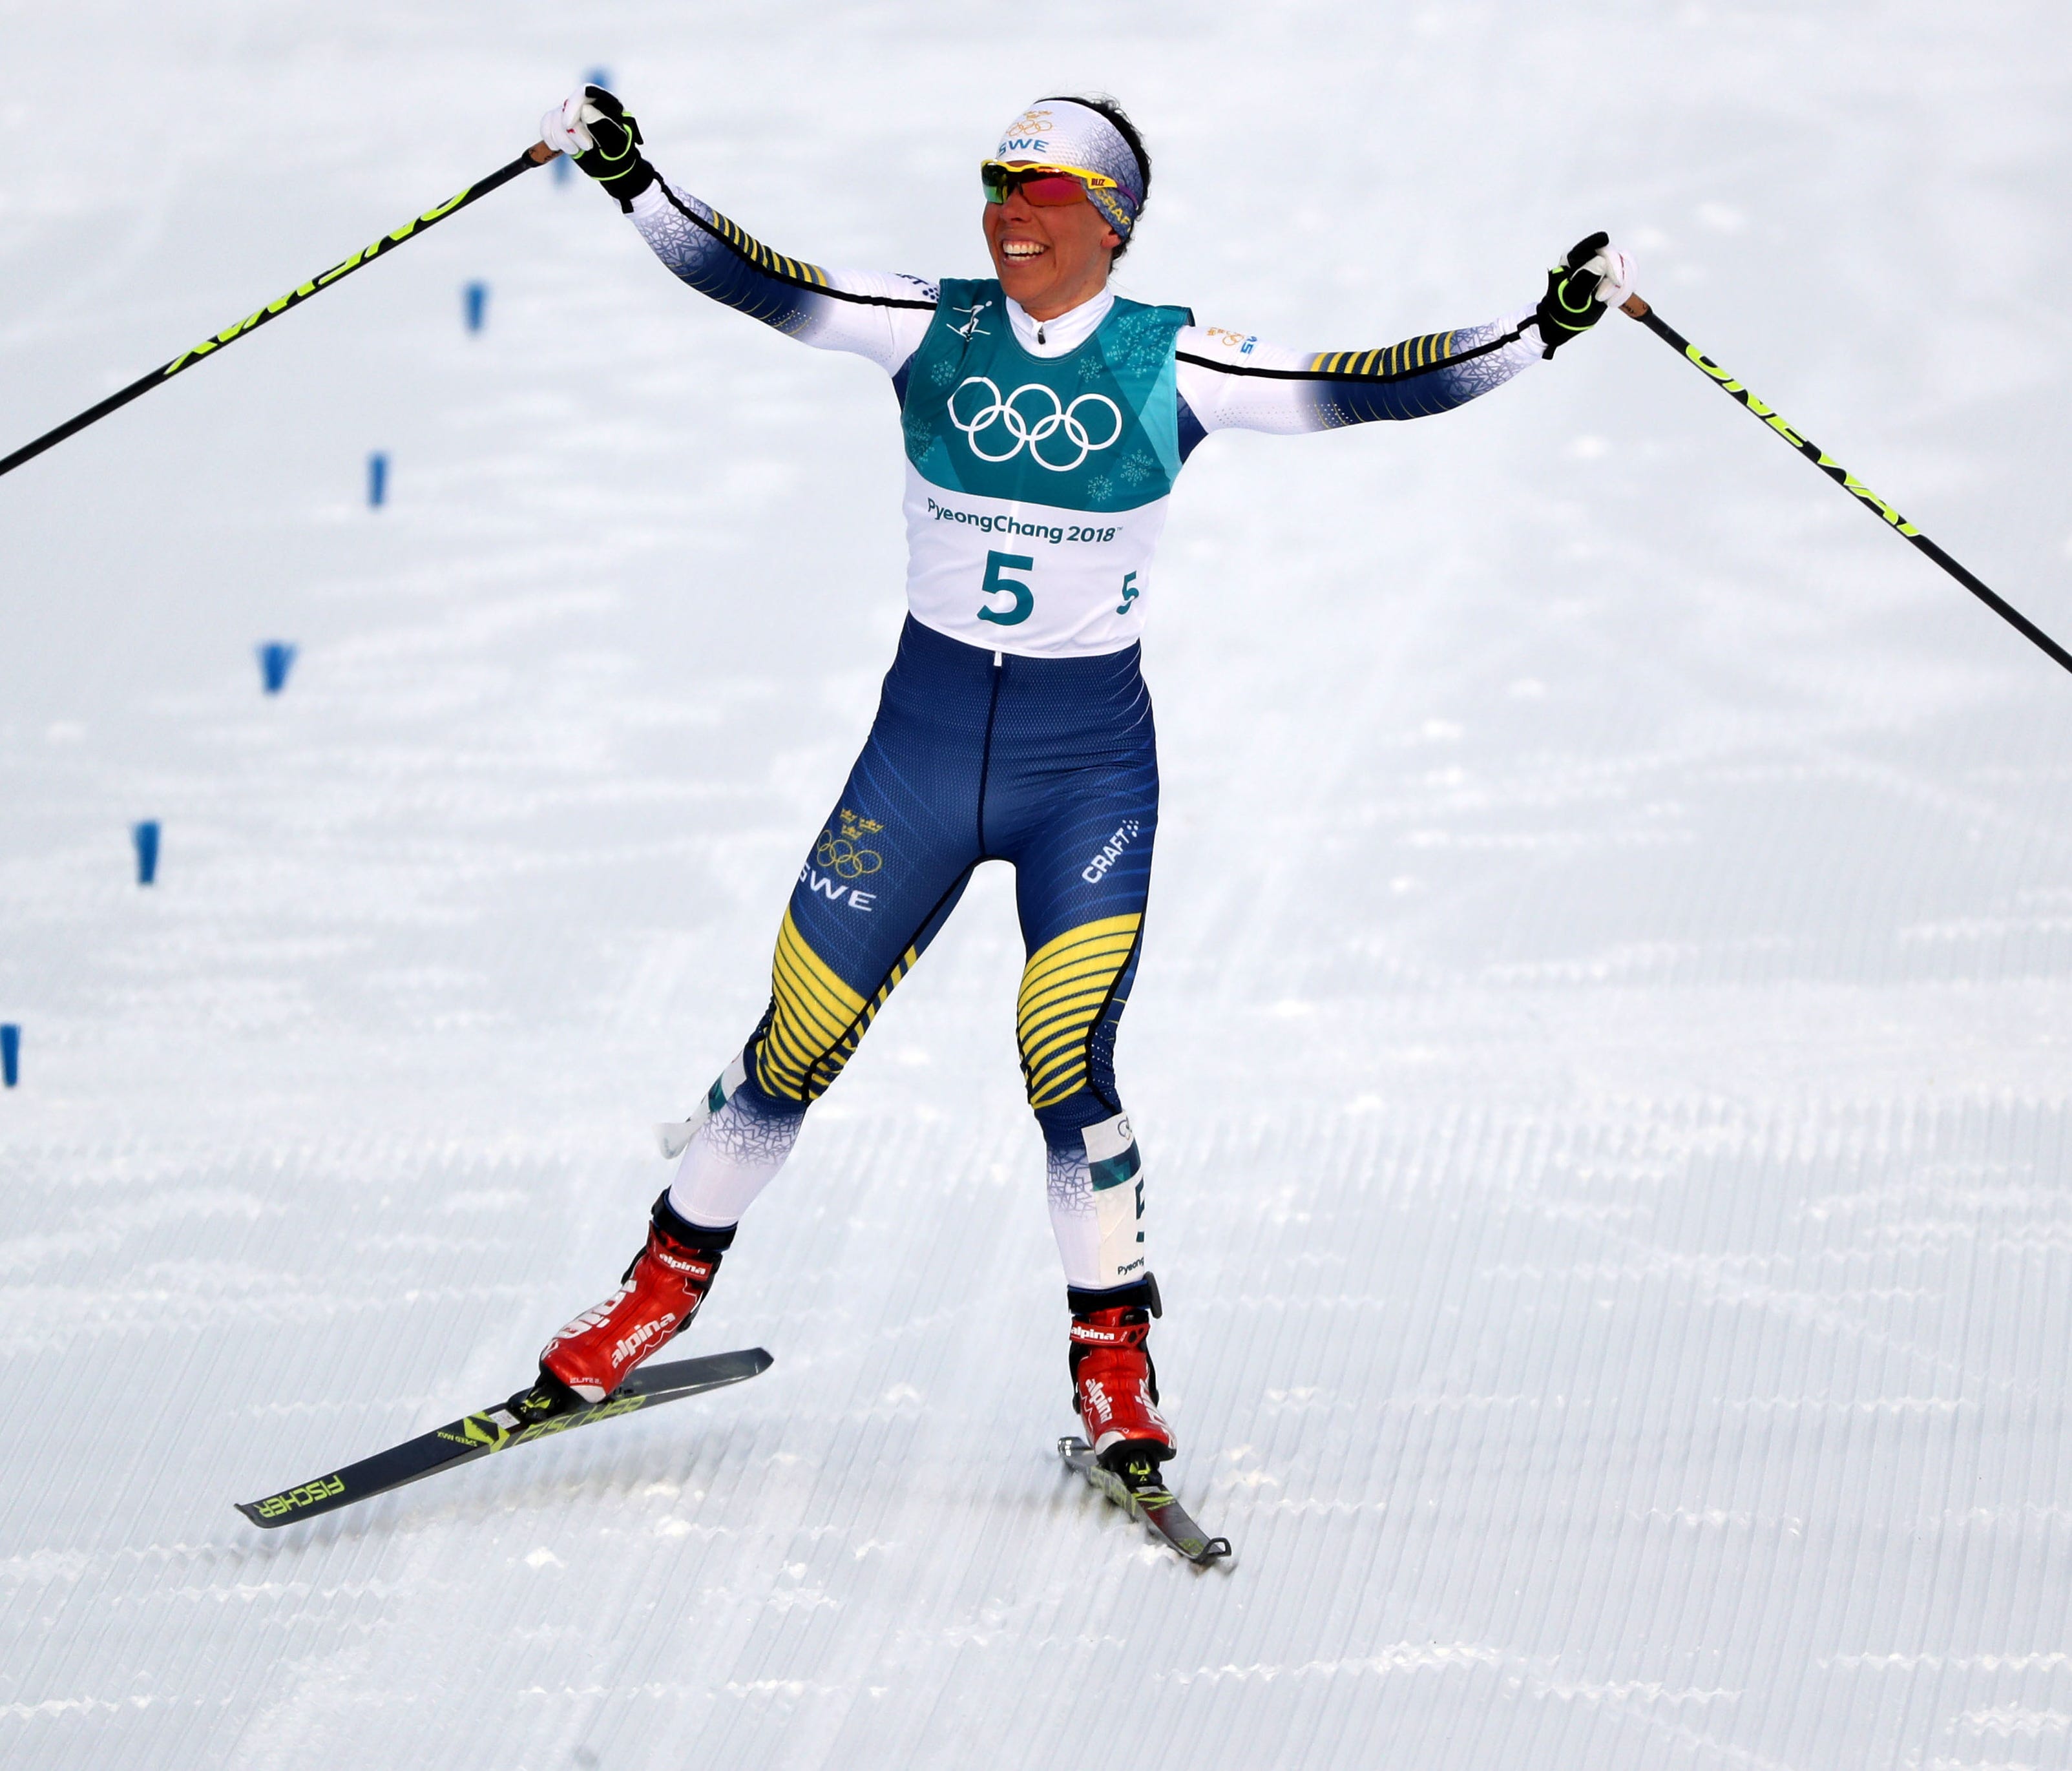 Charlotte Kalla of Sweden celebrates the win in the cross-country skiing 15K, the first medal of the Winter Olympics.